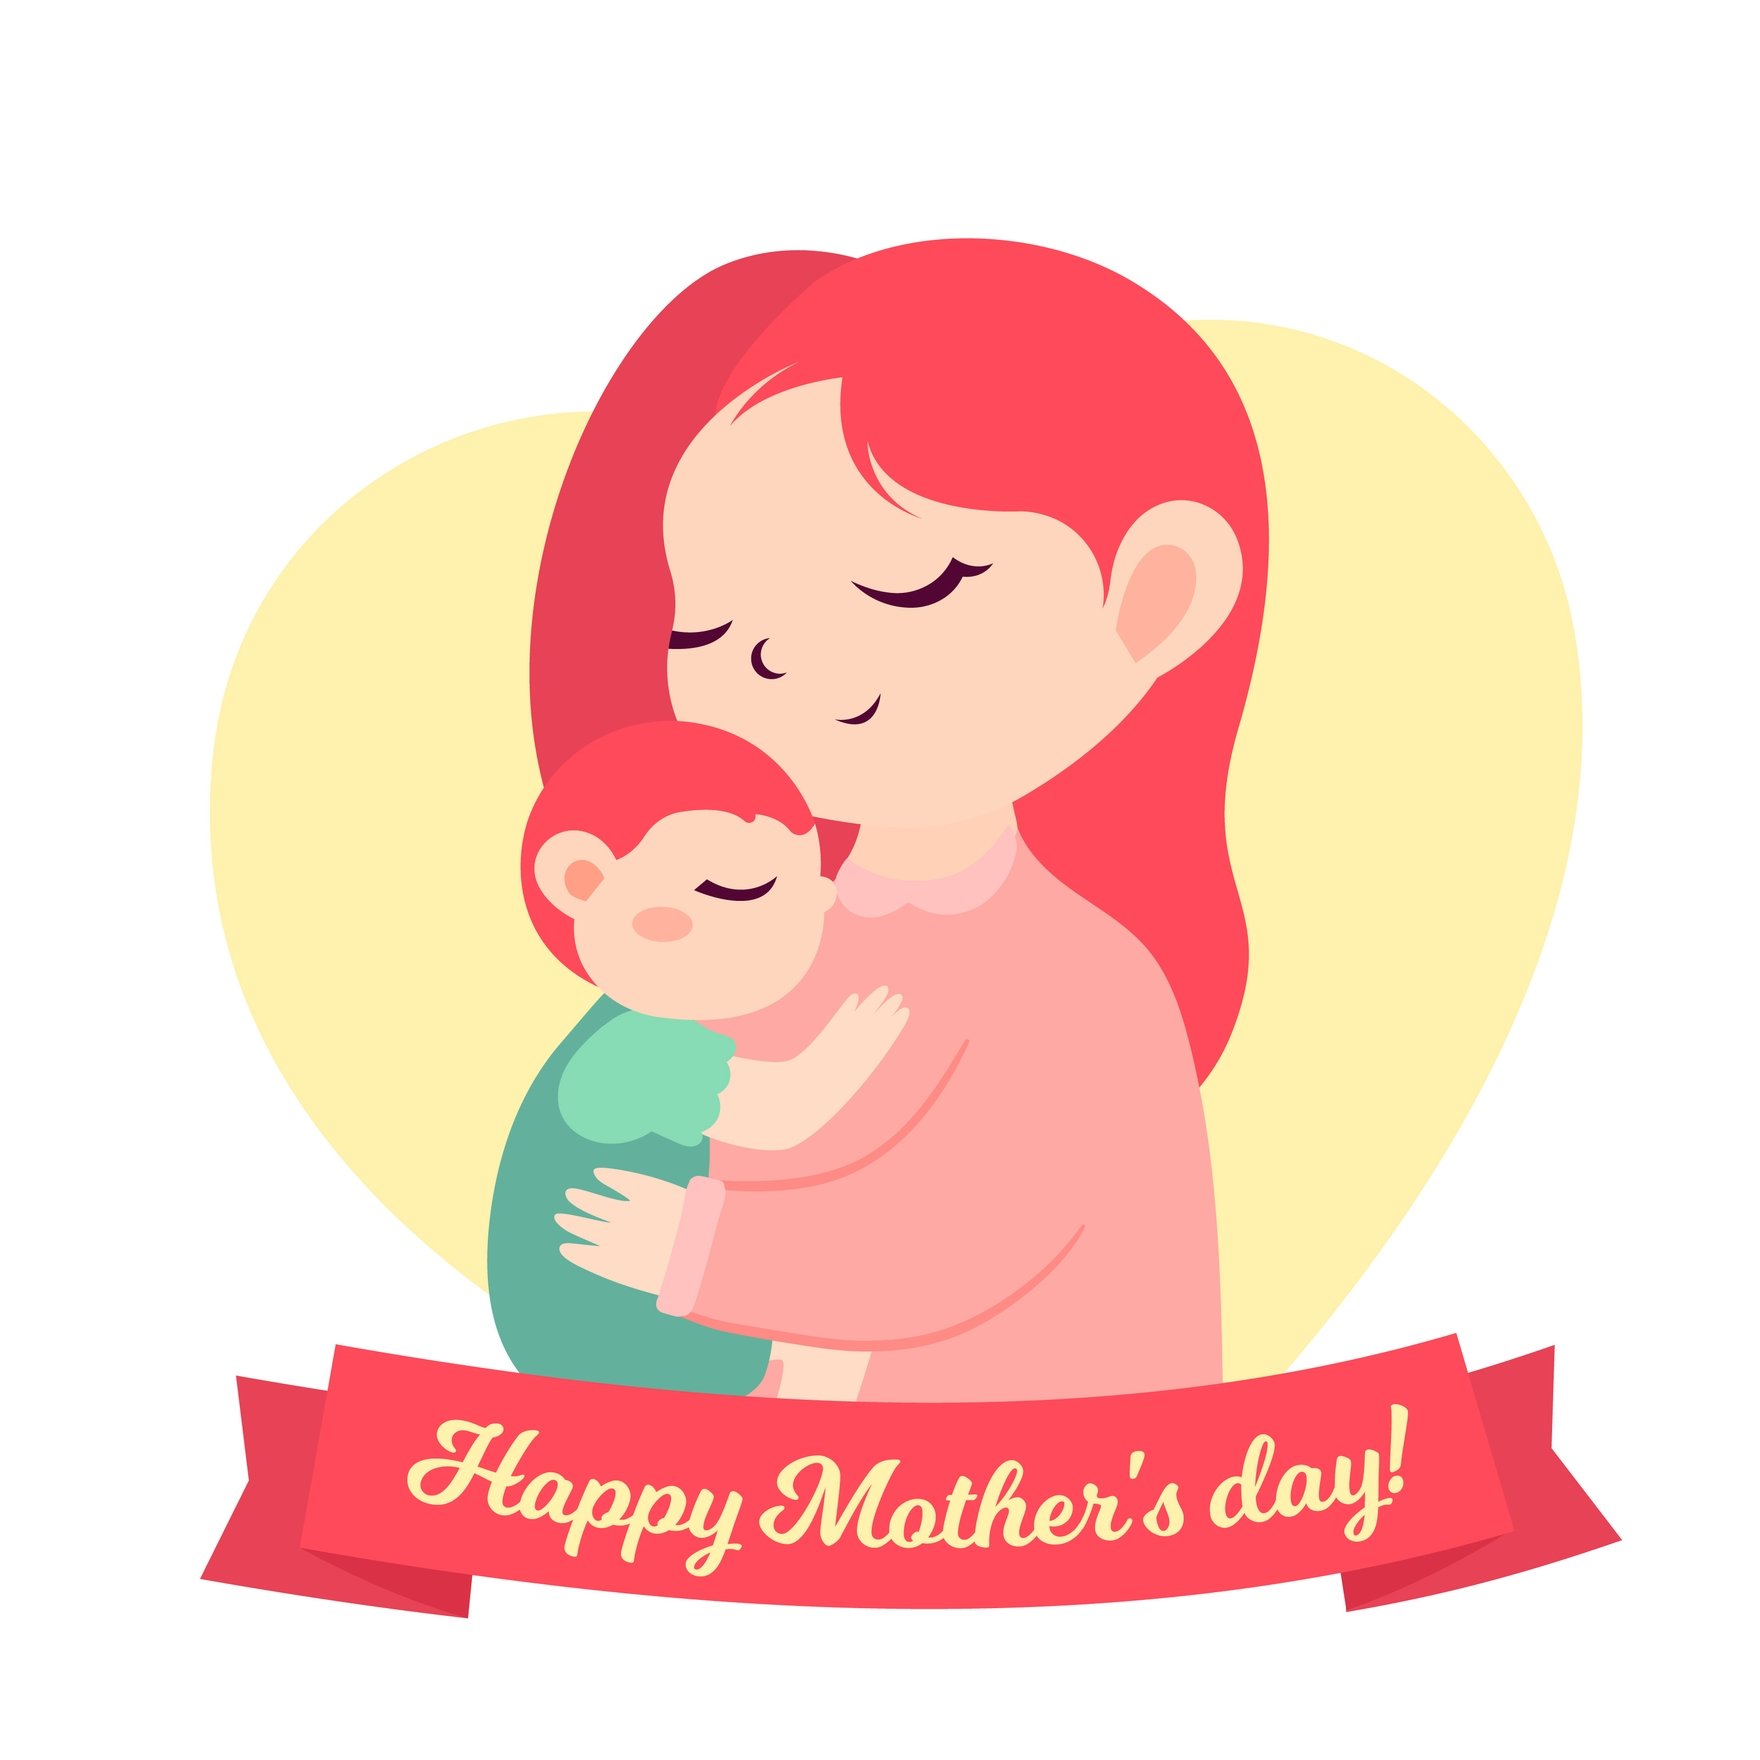 Free Happy Mother's Day GIF in Illustrator, EPS, SVG, JPG, GIF, PNG, After Effects